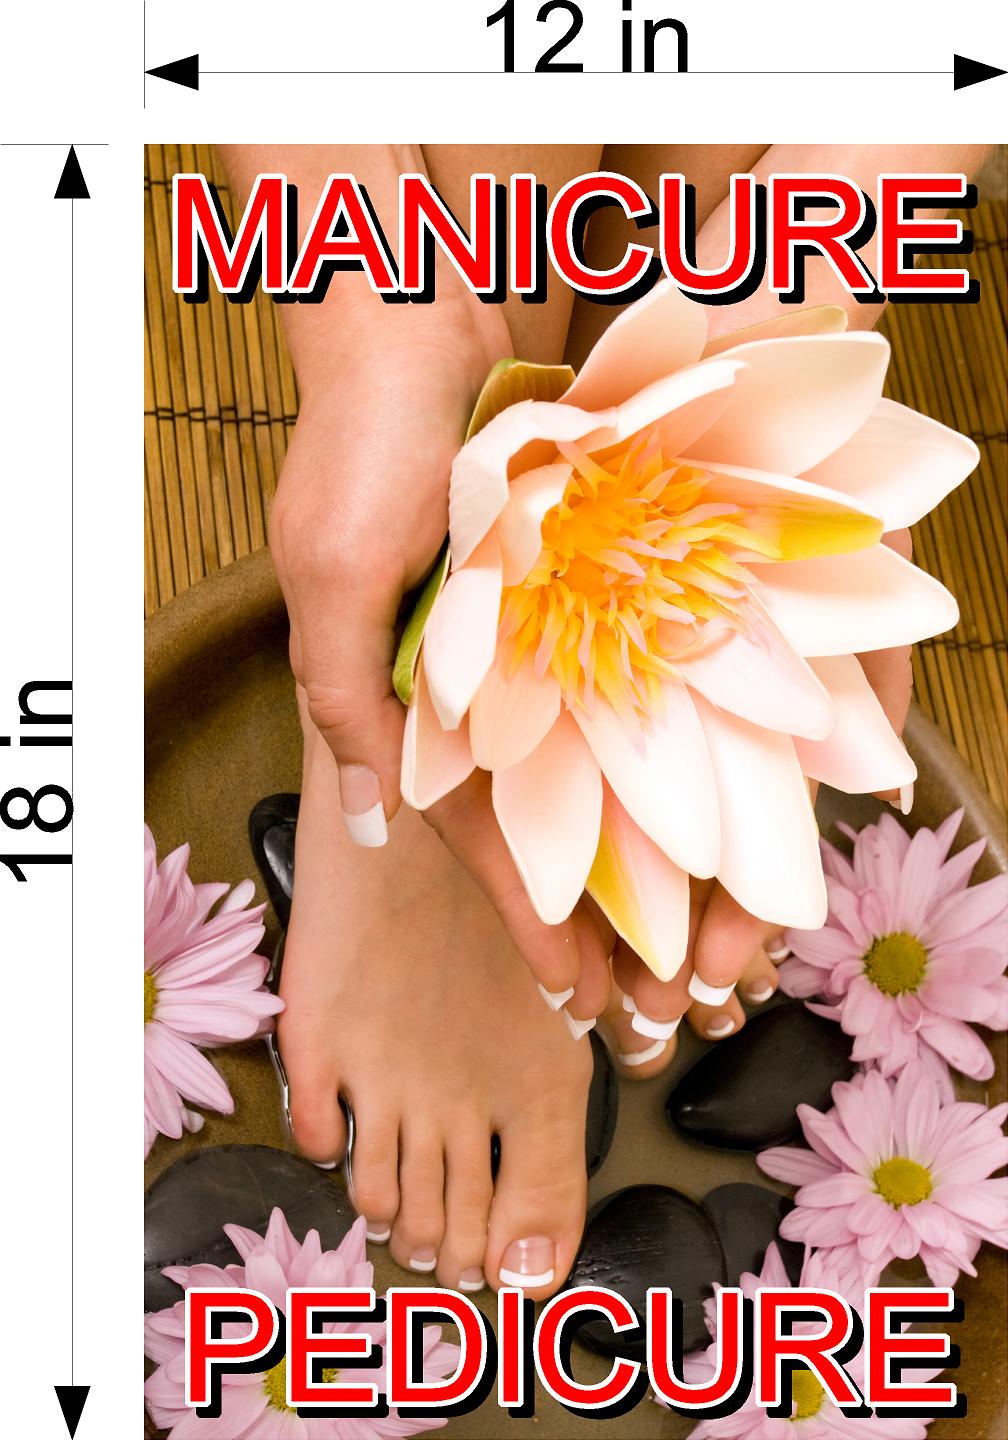 Pedicure & Manicure 17 Wallpaper Poster Decal with Adhesive Backing Wall Sticker Decor Indoors Interior Sign Vertical